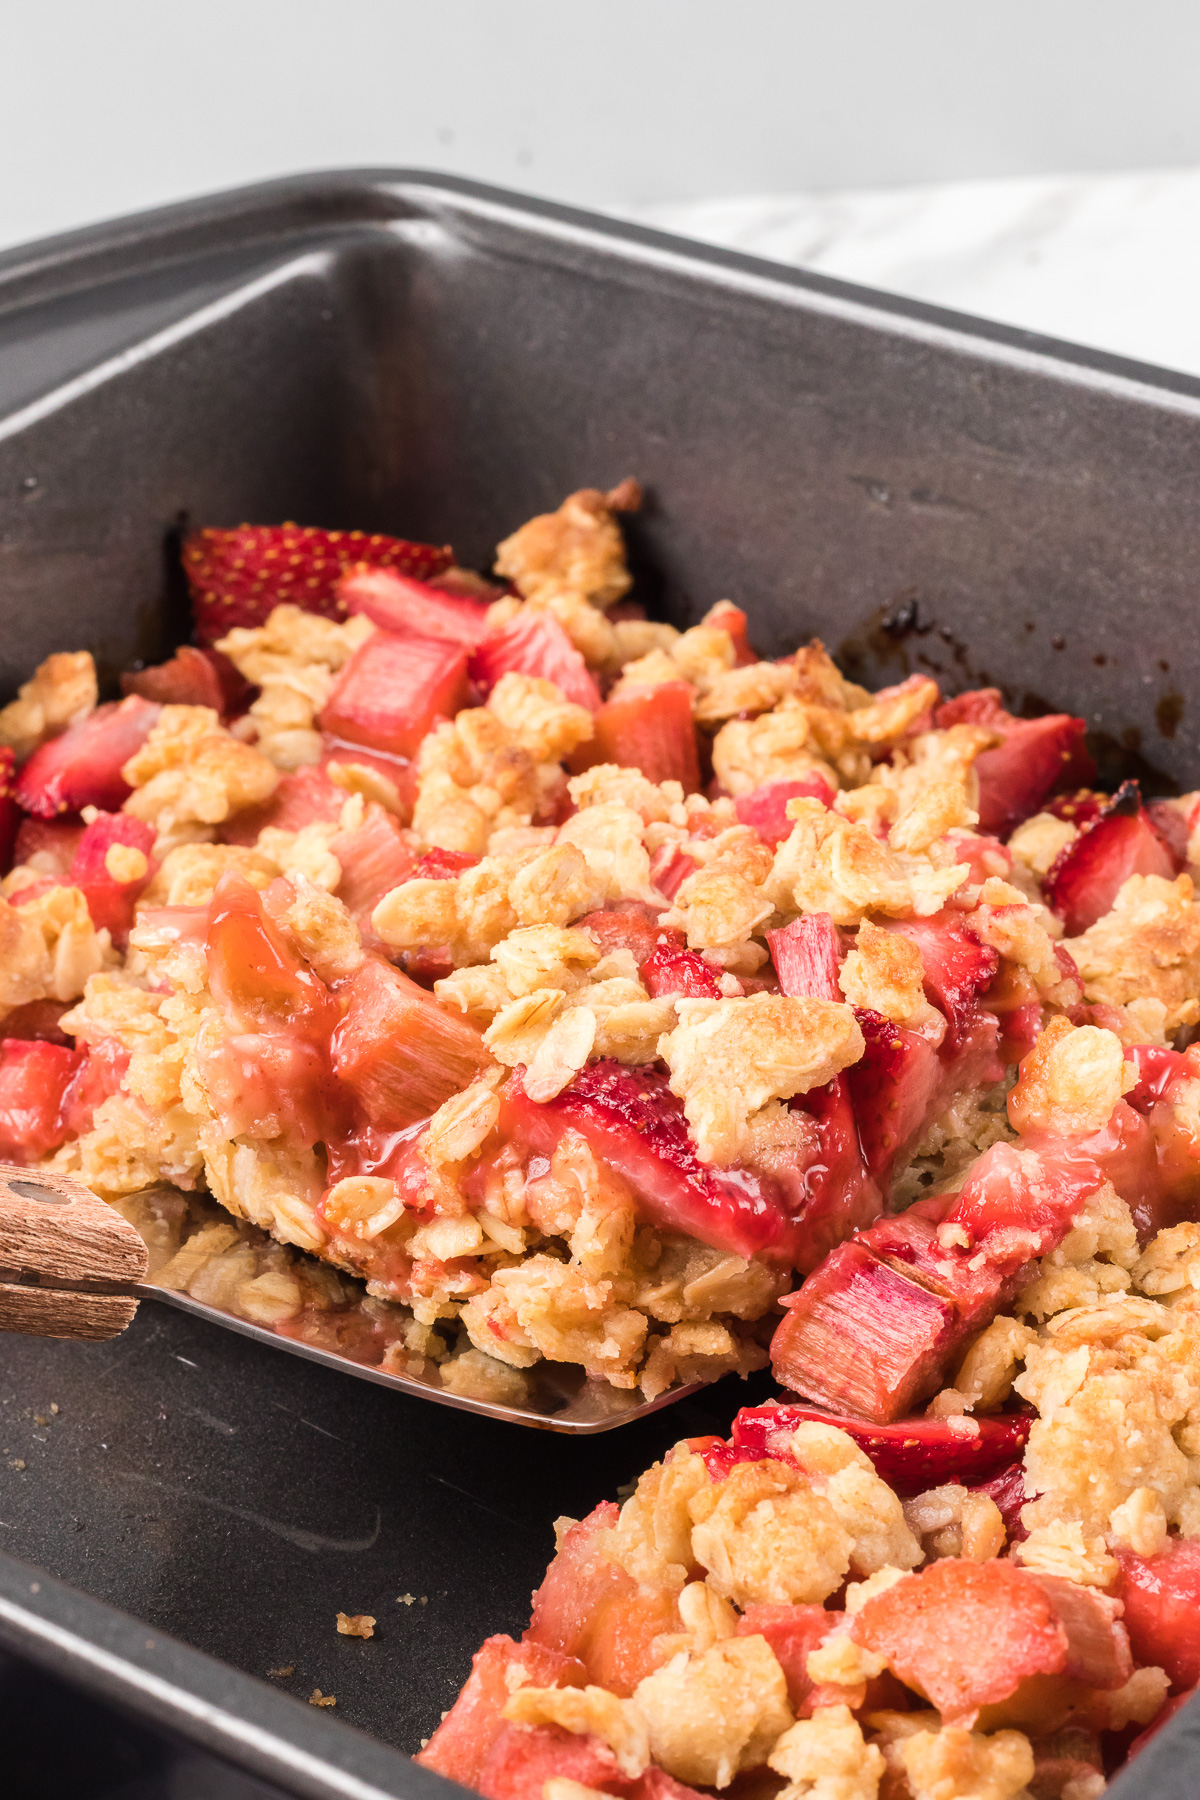 Strawberry Rhubarb Oatmeal Bars combine tart rhubarb and fresh strawberries for the perfect pairing of springtime flavors!! These rich oatmeal bars are perfect for a filling breakfast or an after-dinner treat! via @foodhussy